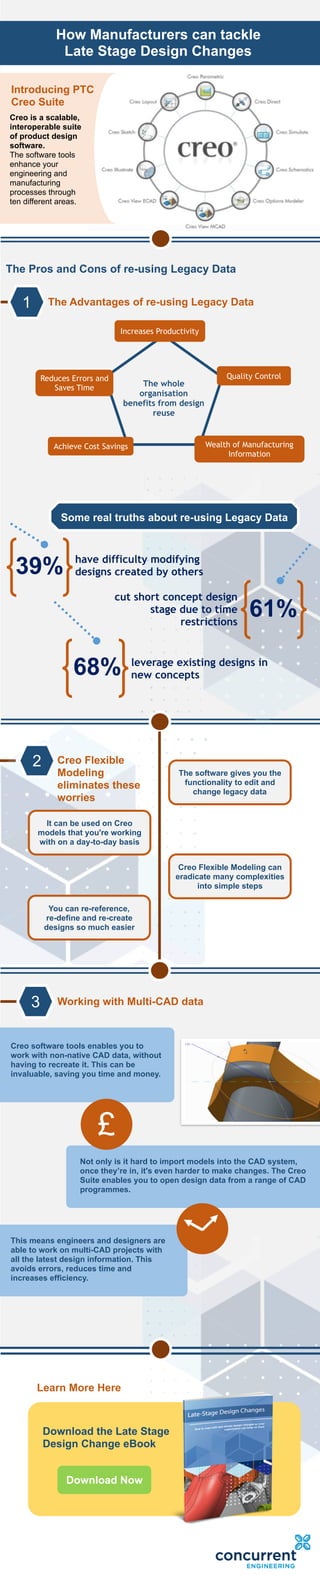 How Manufacturers can tackle
Late Stage Design Changes
Introducing PTC
Creo Suite
The Pros and Cons of re-using Legacy Data
1
Creo is a scalable,
interoperable suite
of product design
software.
The software tools
enhance your
engineering and
manufacturing
processes through
ten different areas.
The Advantages of re-using Legacy Data
Creo Flexible
Modeling
eliminates these
worries
The whole
organisation
benefits from design
reuse
Increases Productivity
Quality Control
Wealth of Manufacturing
Information
Achieve Cost Savings
Reduces Errors and
Saves Time
2
39%
61%
68%
have difficulty modifying
designs created by others
cut short concept design
stage due to time
restrictions
leverage existing designs in
new concepts
Some real truths about re-using Legacy Data
It can be used on Creo
models that you're working
with on a day-to-day basis
The software gives you the
functionality to edit and
change legacy data
Creo Flexible Modeling can
eradicate many complexities
into simple steps
You can re-reference,
re-define and re-create
designs so much easier
Working with Multi-CAD data3
Creo software tools enables you to
work with non-native CAD data, without
having to recreate it. This can be
invaluable, saving you time and money.
Not only is it hard to import models into the CAD system,
once they’re in, it's even harder to make changes. The Creo
Suite enables you to open design data from a range of CAD
programmes.
£
This means engineers and designers are
able to work on multi-CAD projects with
all the latest design information. This
avoids errors, reduces time and
increases efficiency.
Download the Late Stage
Design Change eBook
Download Now
Learn More Here
 